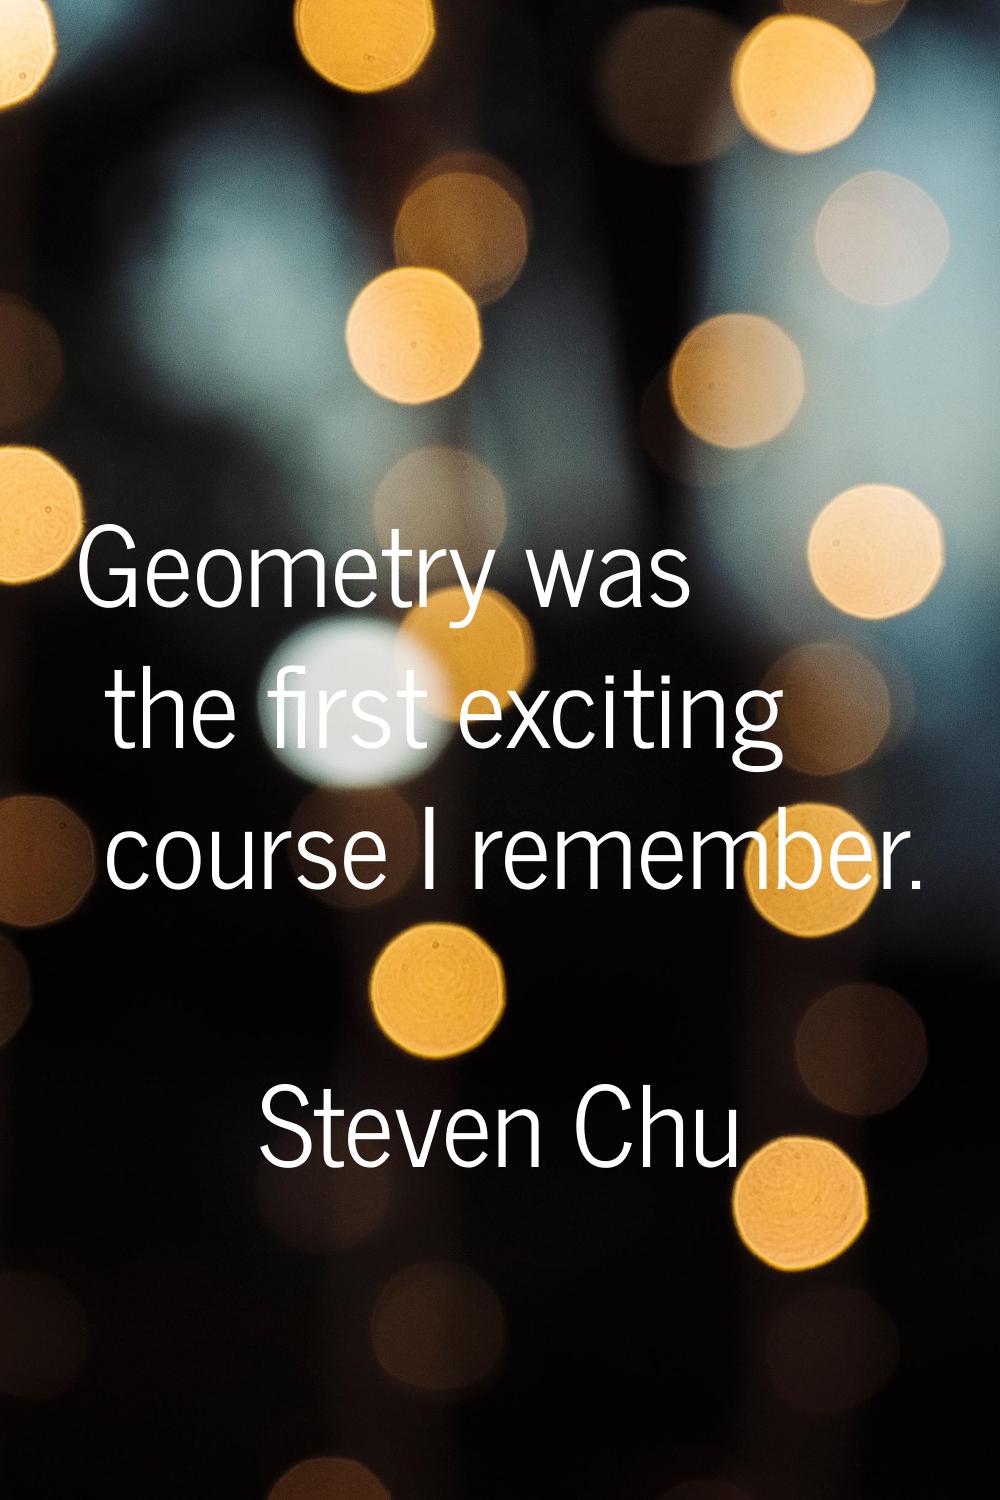 Geometry was the first exciting course I remember.